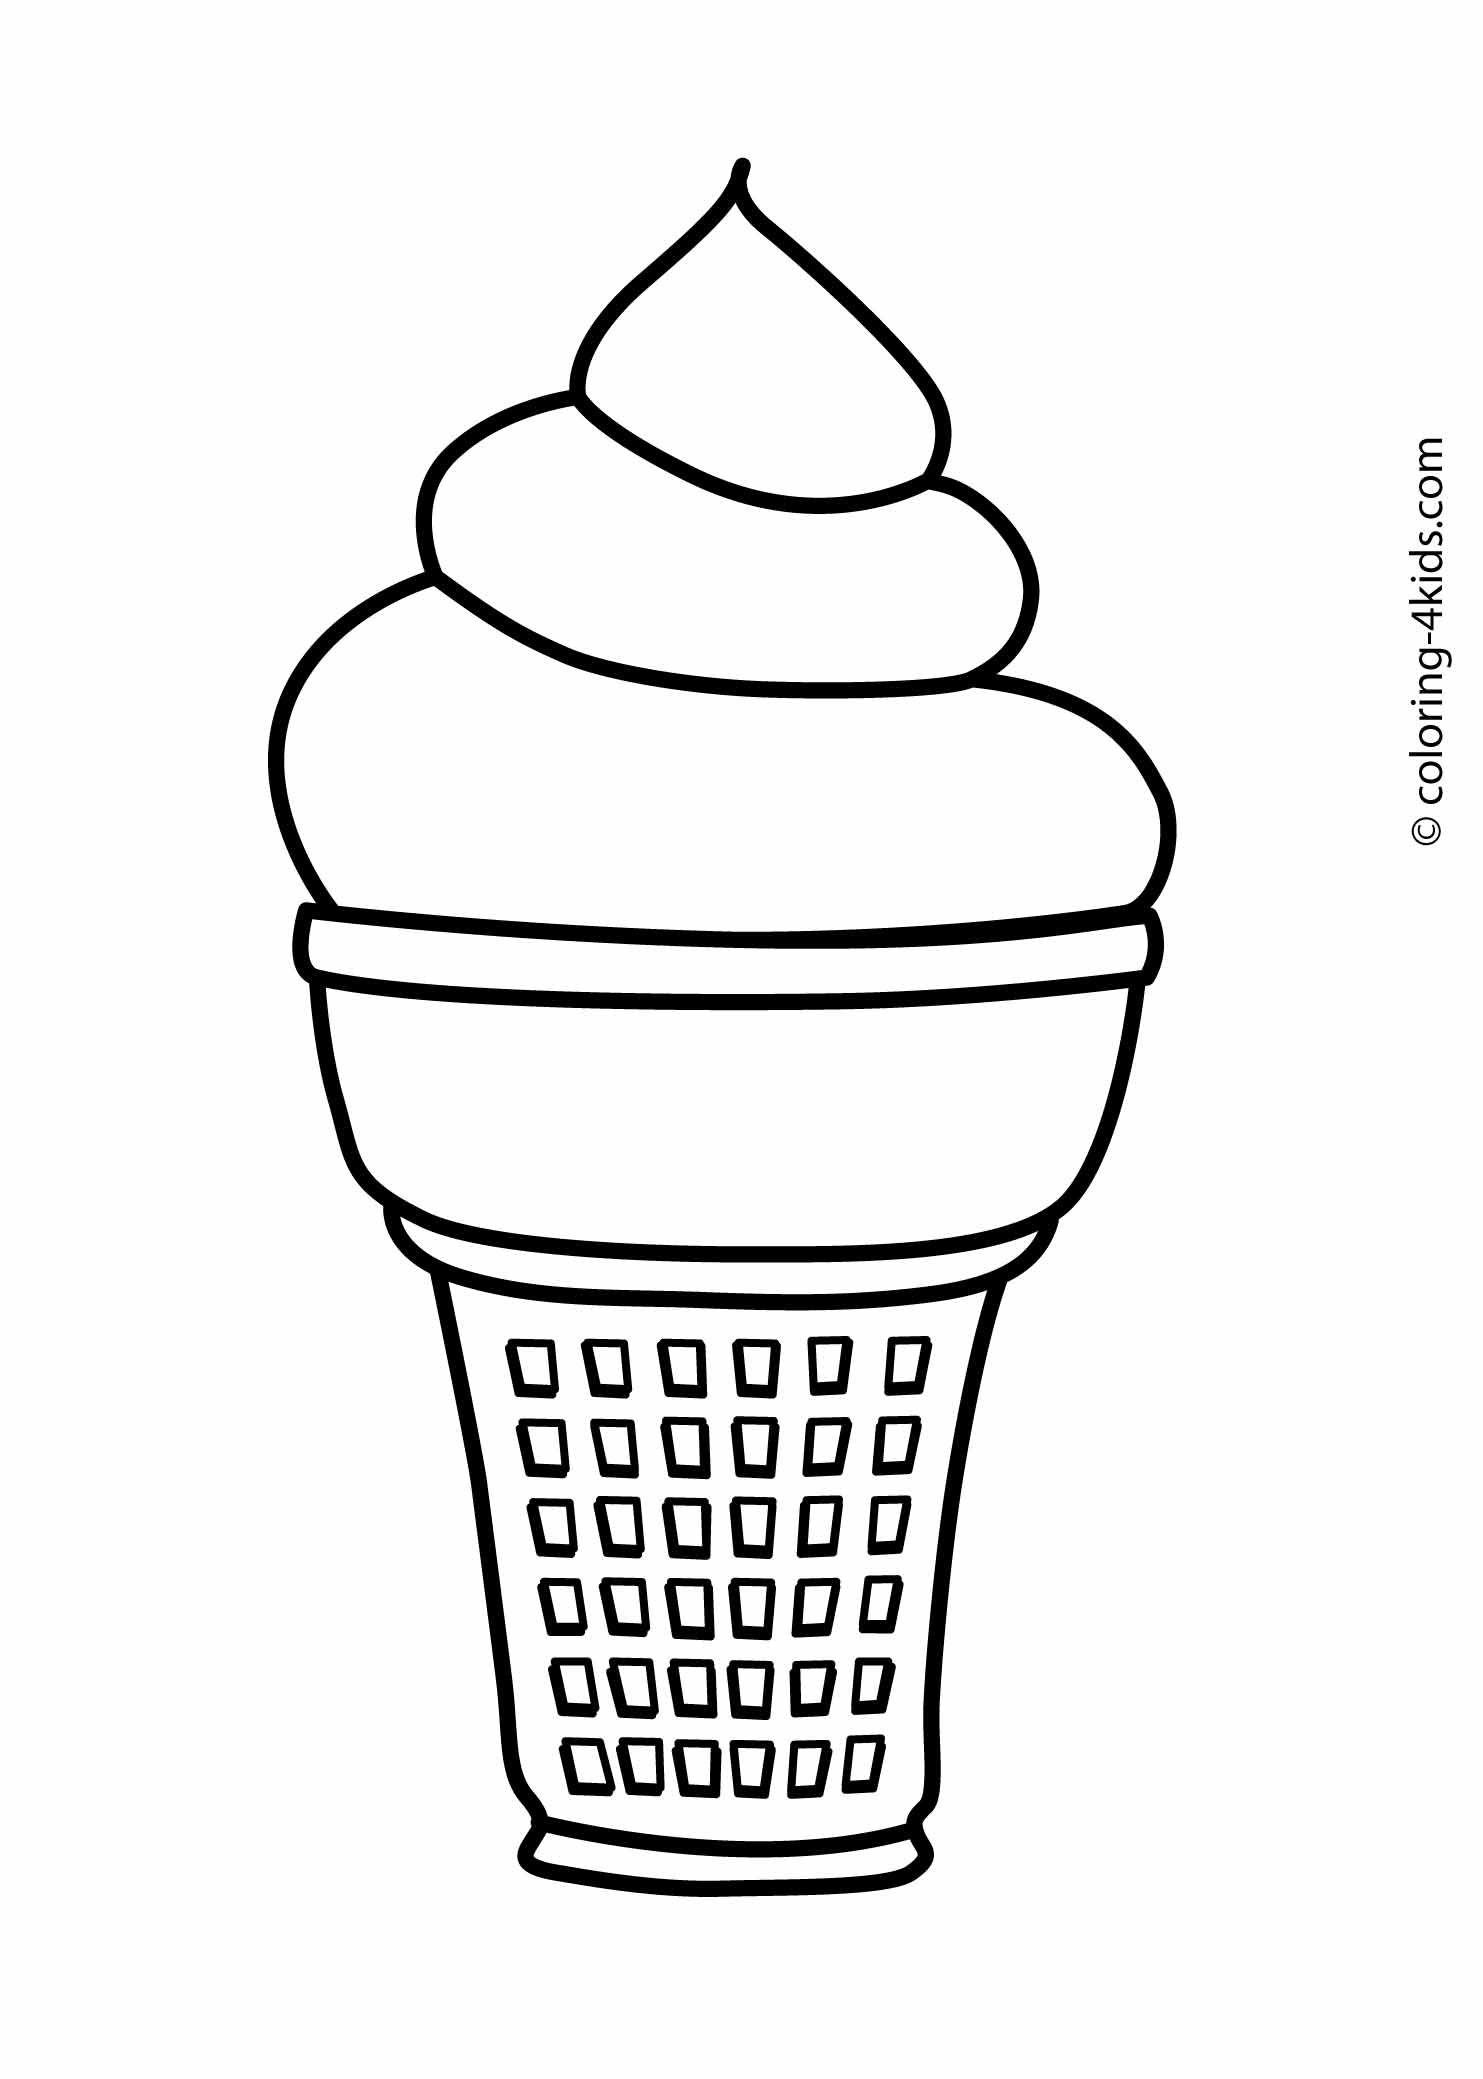 Download Ice Cream Cone Coloring Page Pictures - Coloring Page For Kids